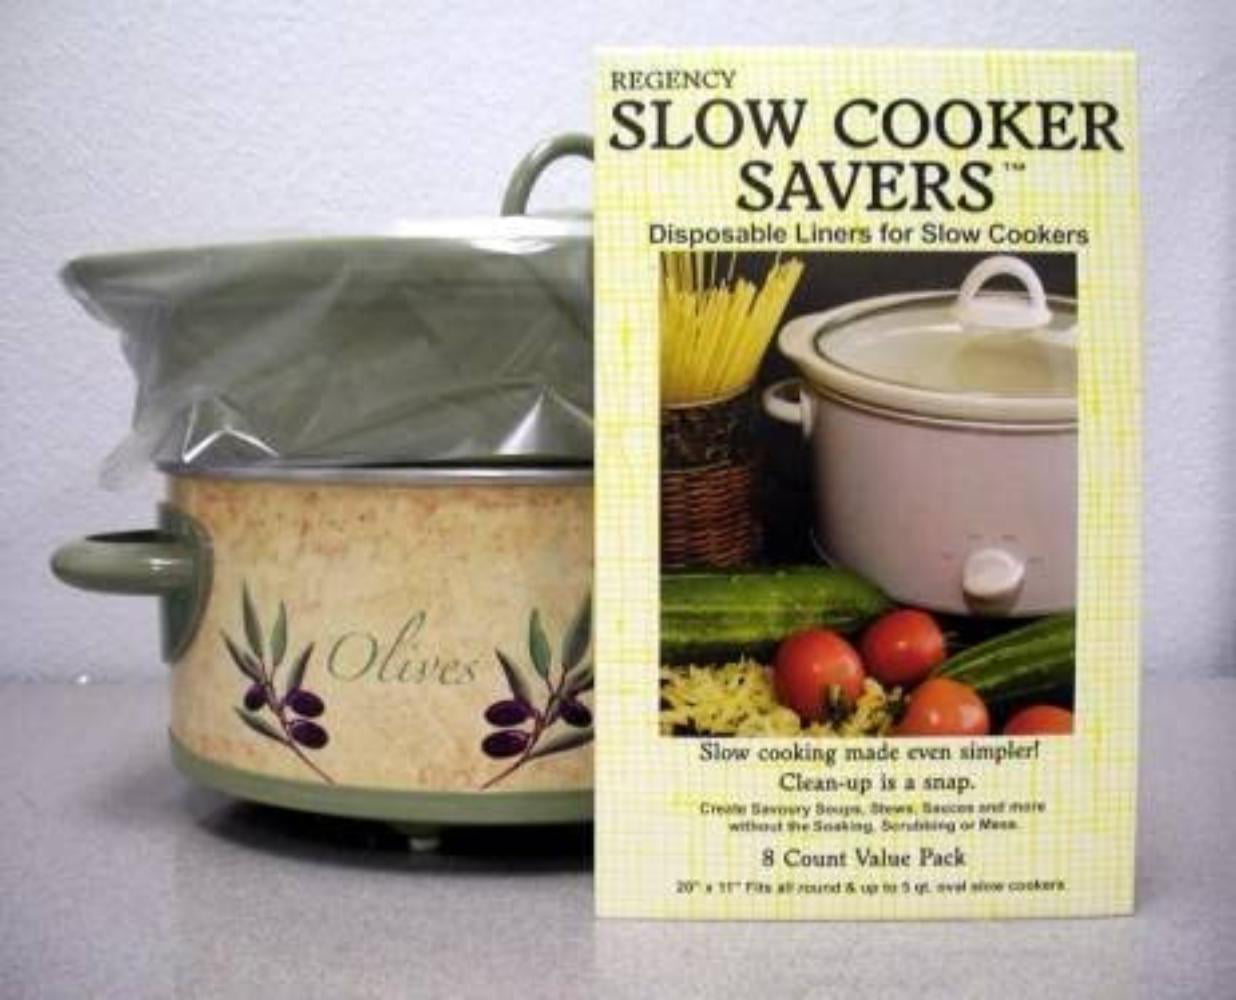 2... Triple Pack Disposable Liners for Slow Cookers Regency Slow Cooker Savers 